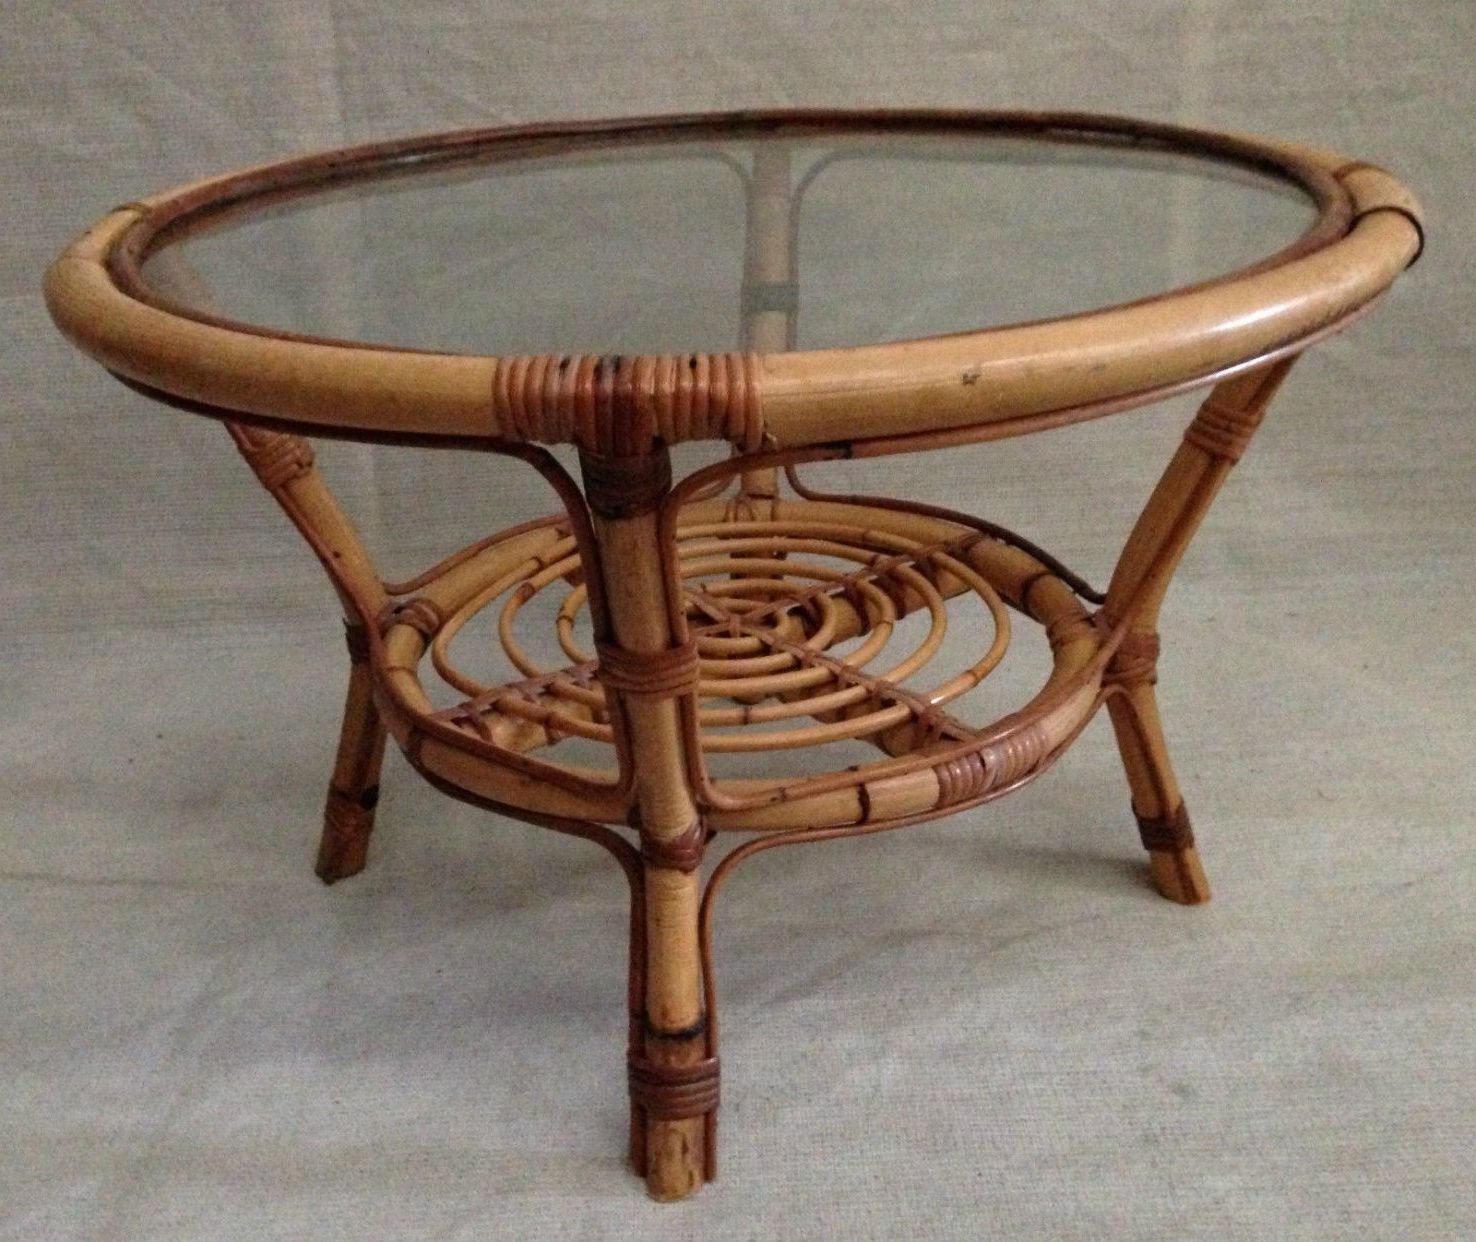 Retro Round Glasstop Dining Tables With Most Recent Vintage Round Cane & Glass Coffee Table Woven Wicker Rattan (View 17 of 30)